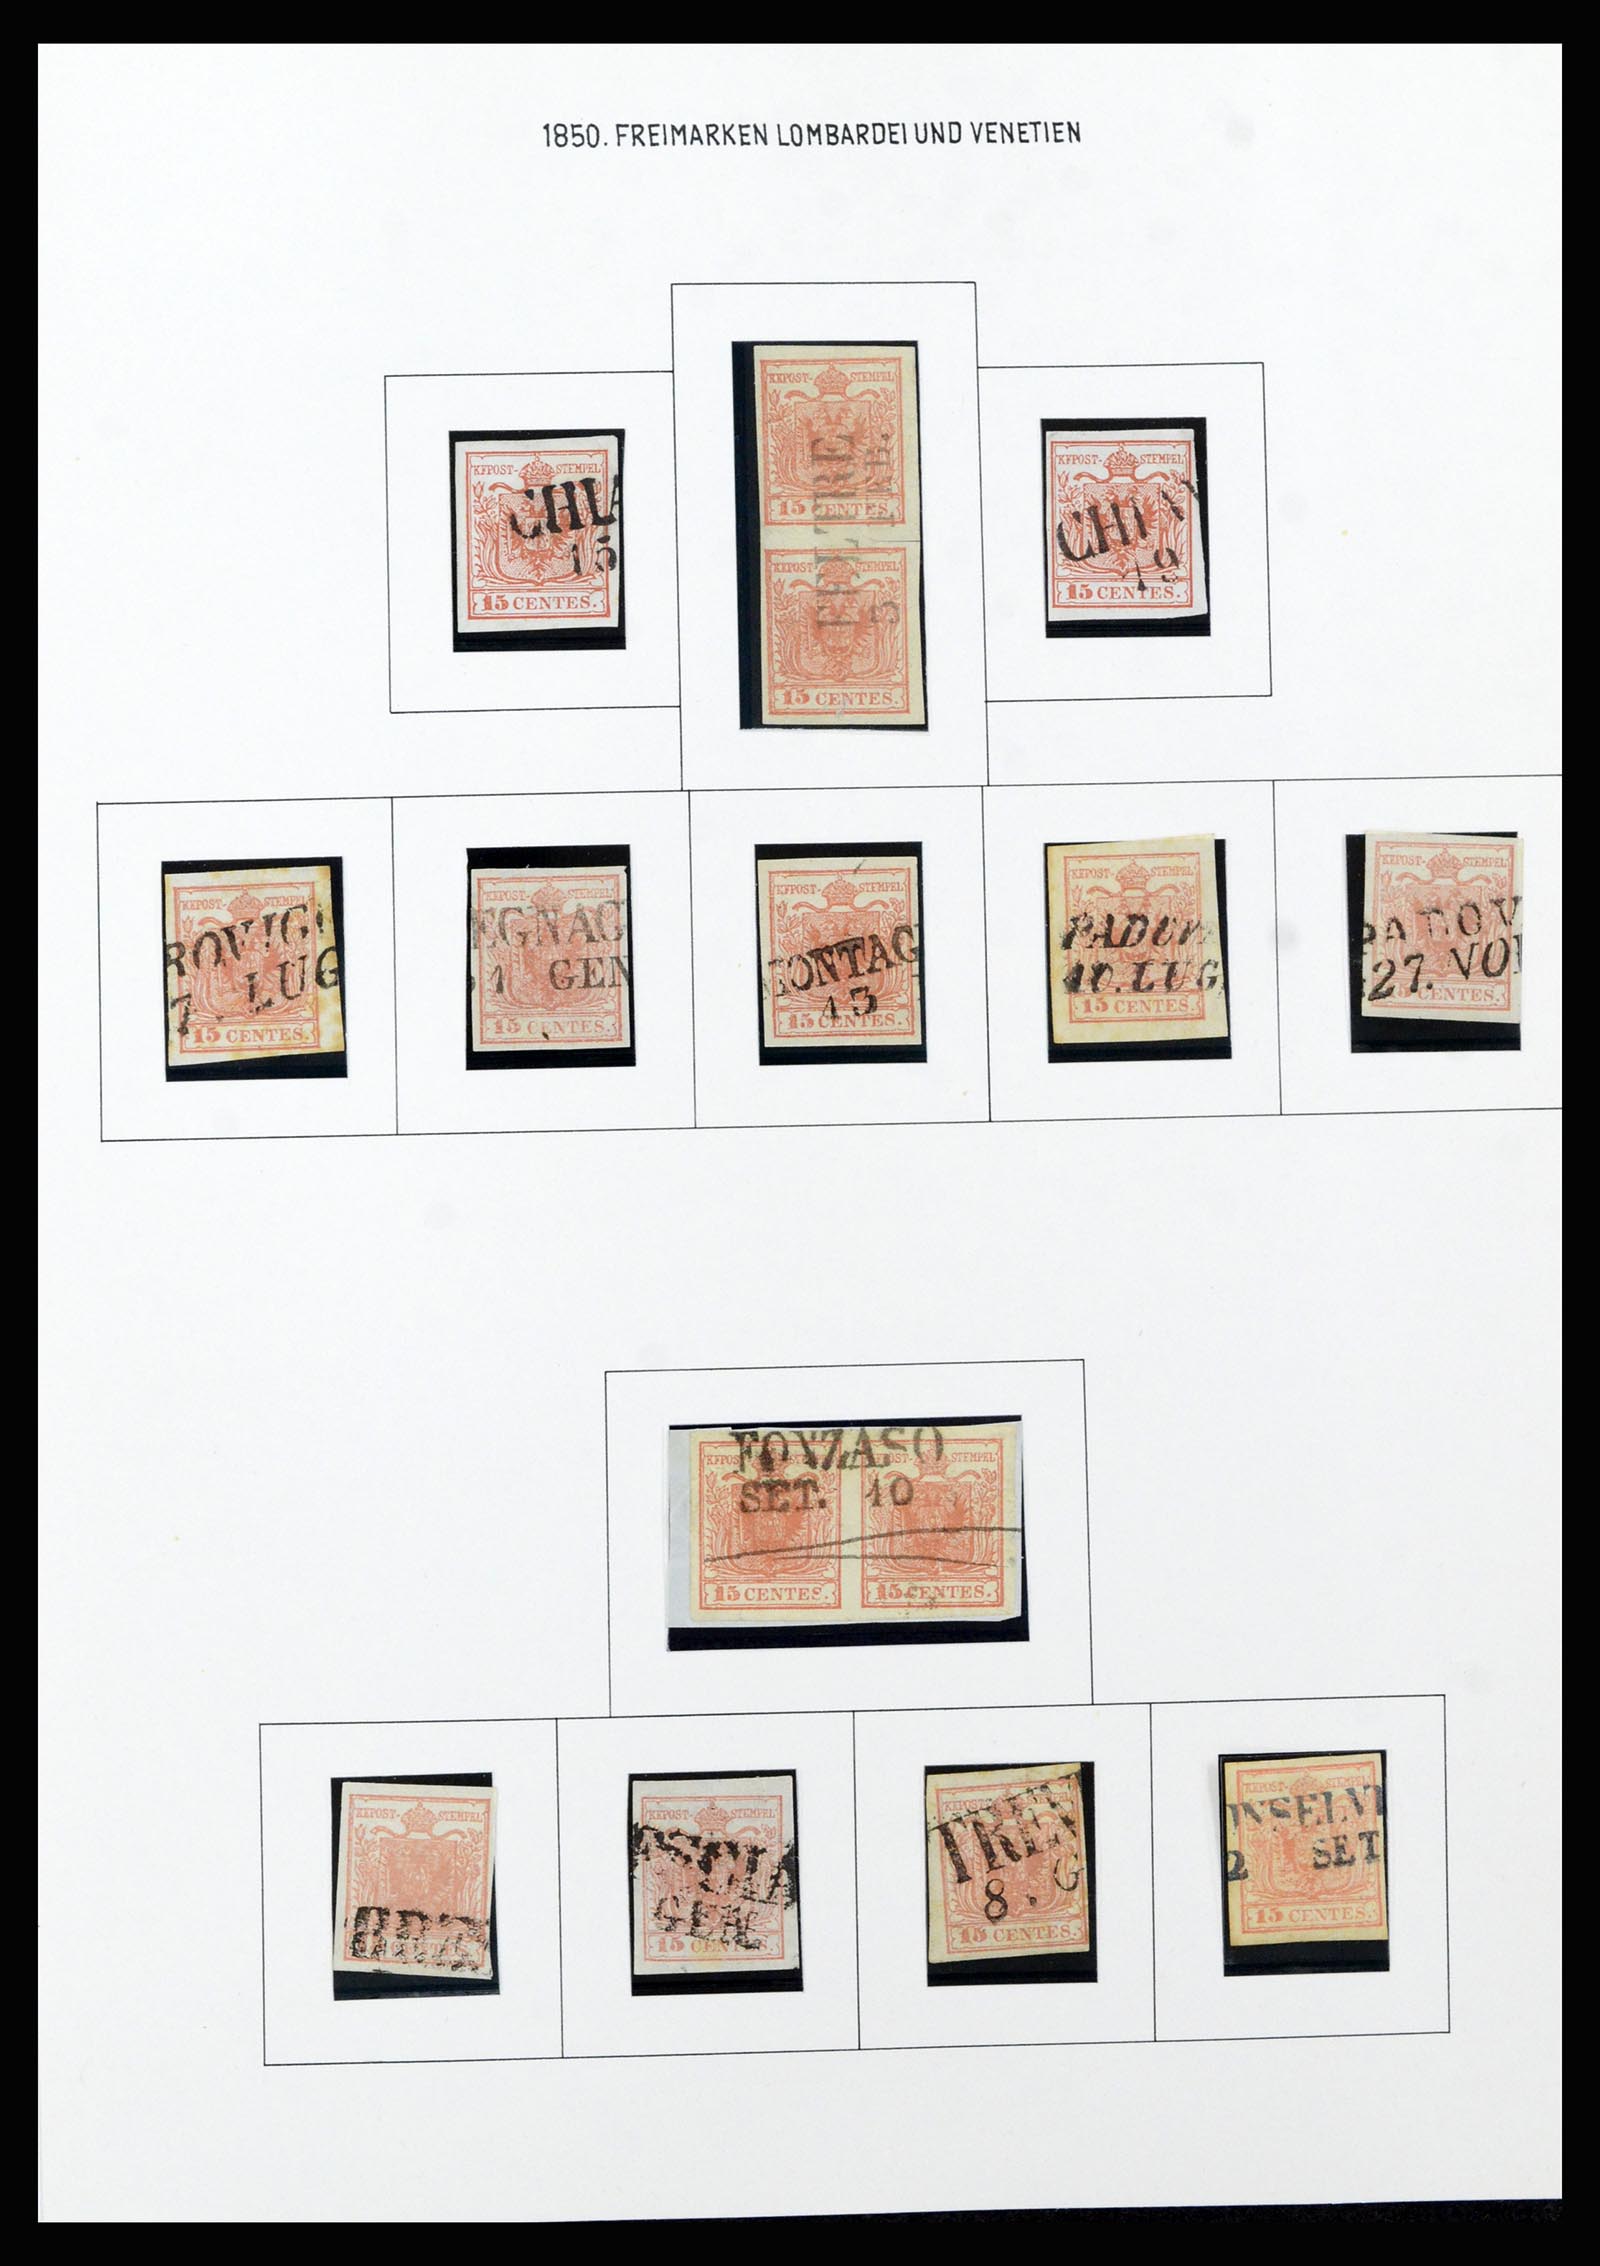 37153 002 - Stamp collection 37153 Lombardy-Venetia 1850-1864.